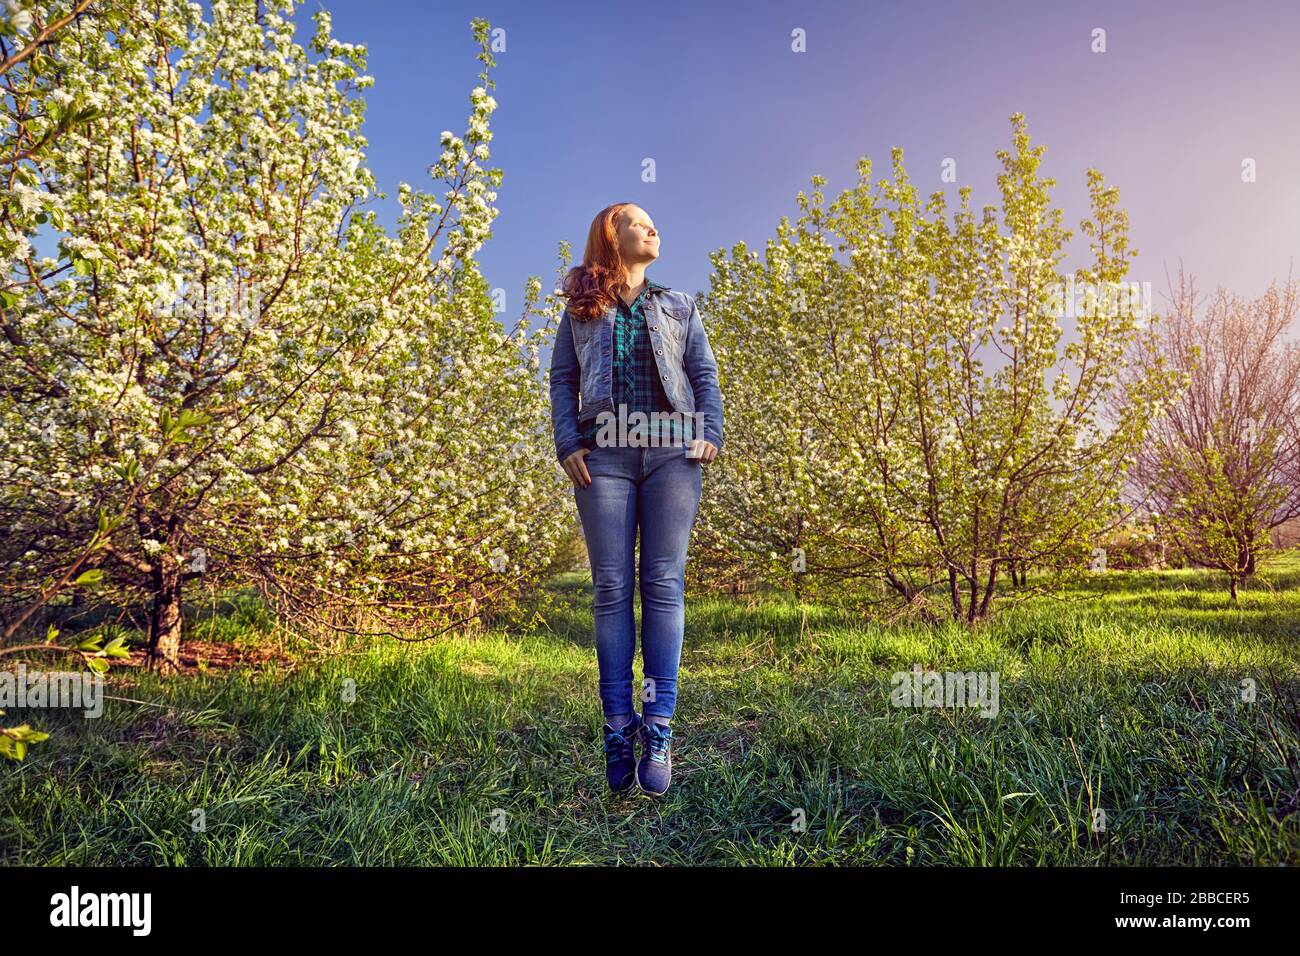 Woman in with red hair jumping in the garden with cherry blossom trees at sunrise Stock Photo